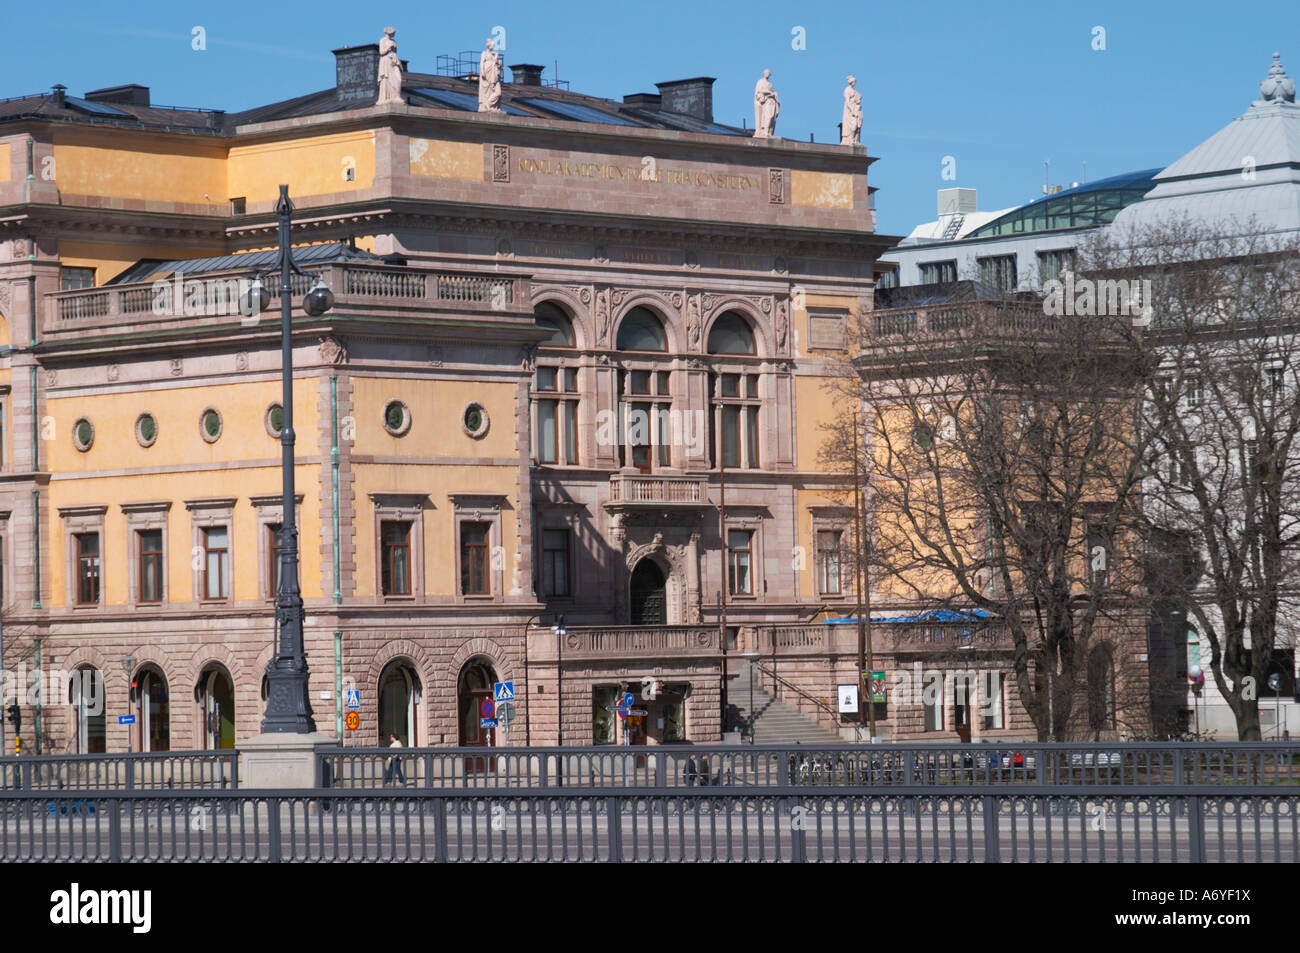 Konstakademien The Royal Academy for the fine arts. Norrmalm. Stockholm. Sweden, Europe. Stock Photo